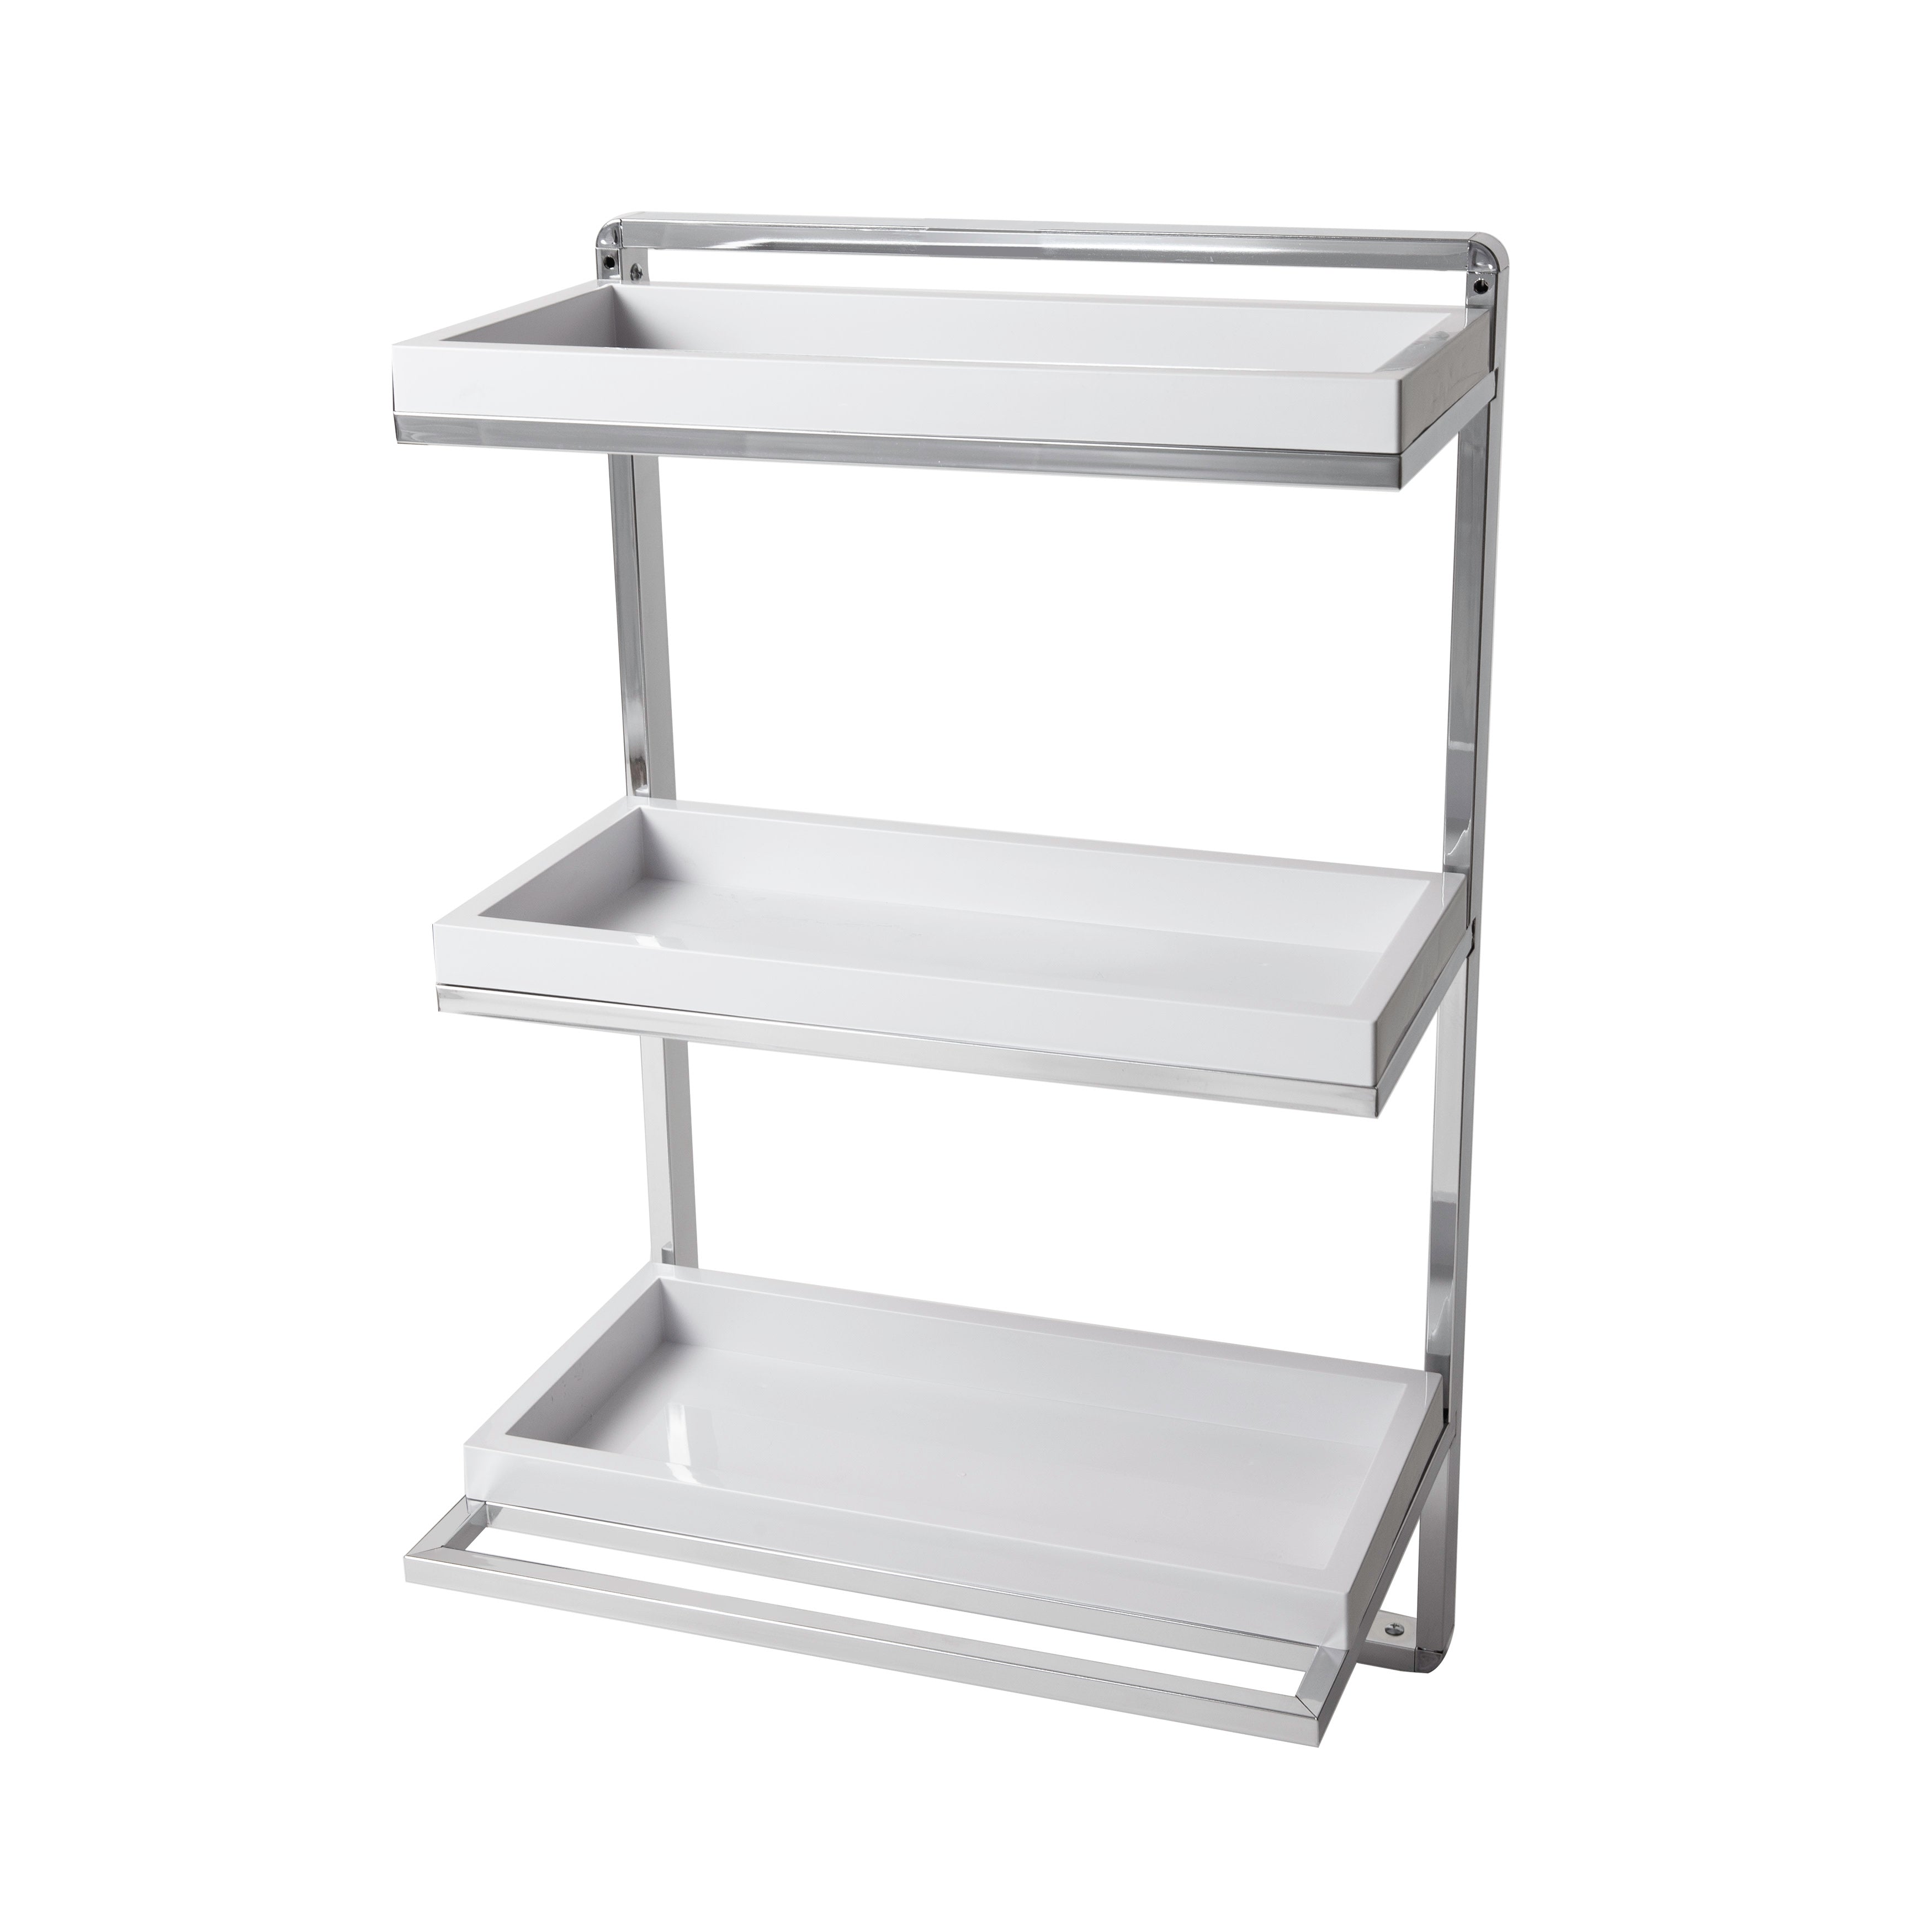 Danya B. Wall Mount 2-Tier Chrome Shelving Unit with Towel Rack and Trays - White